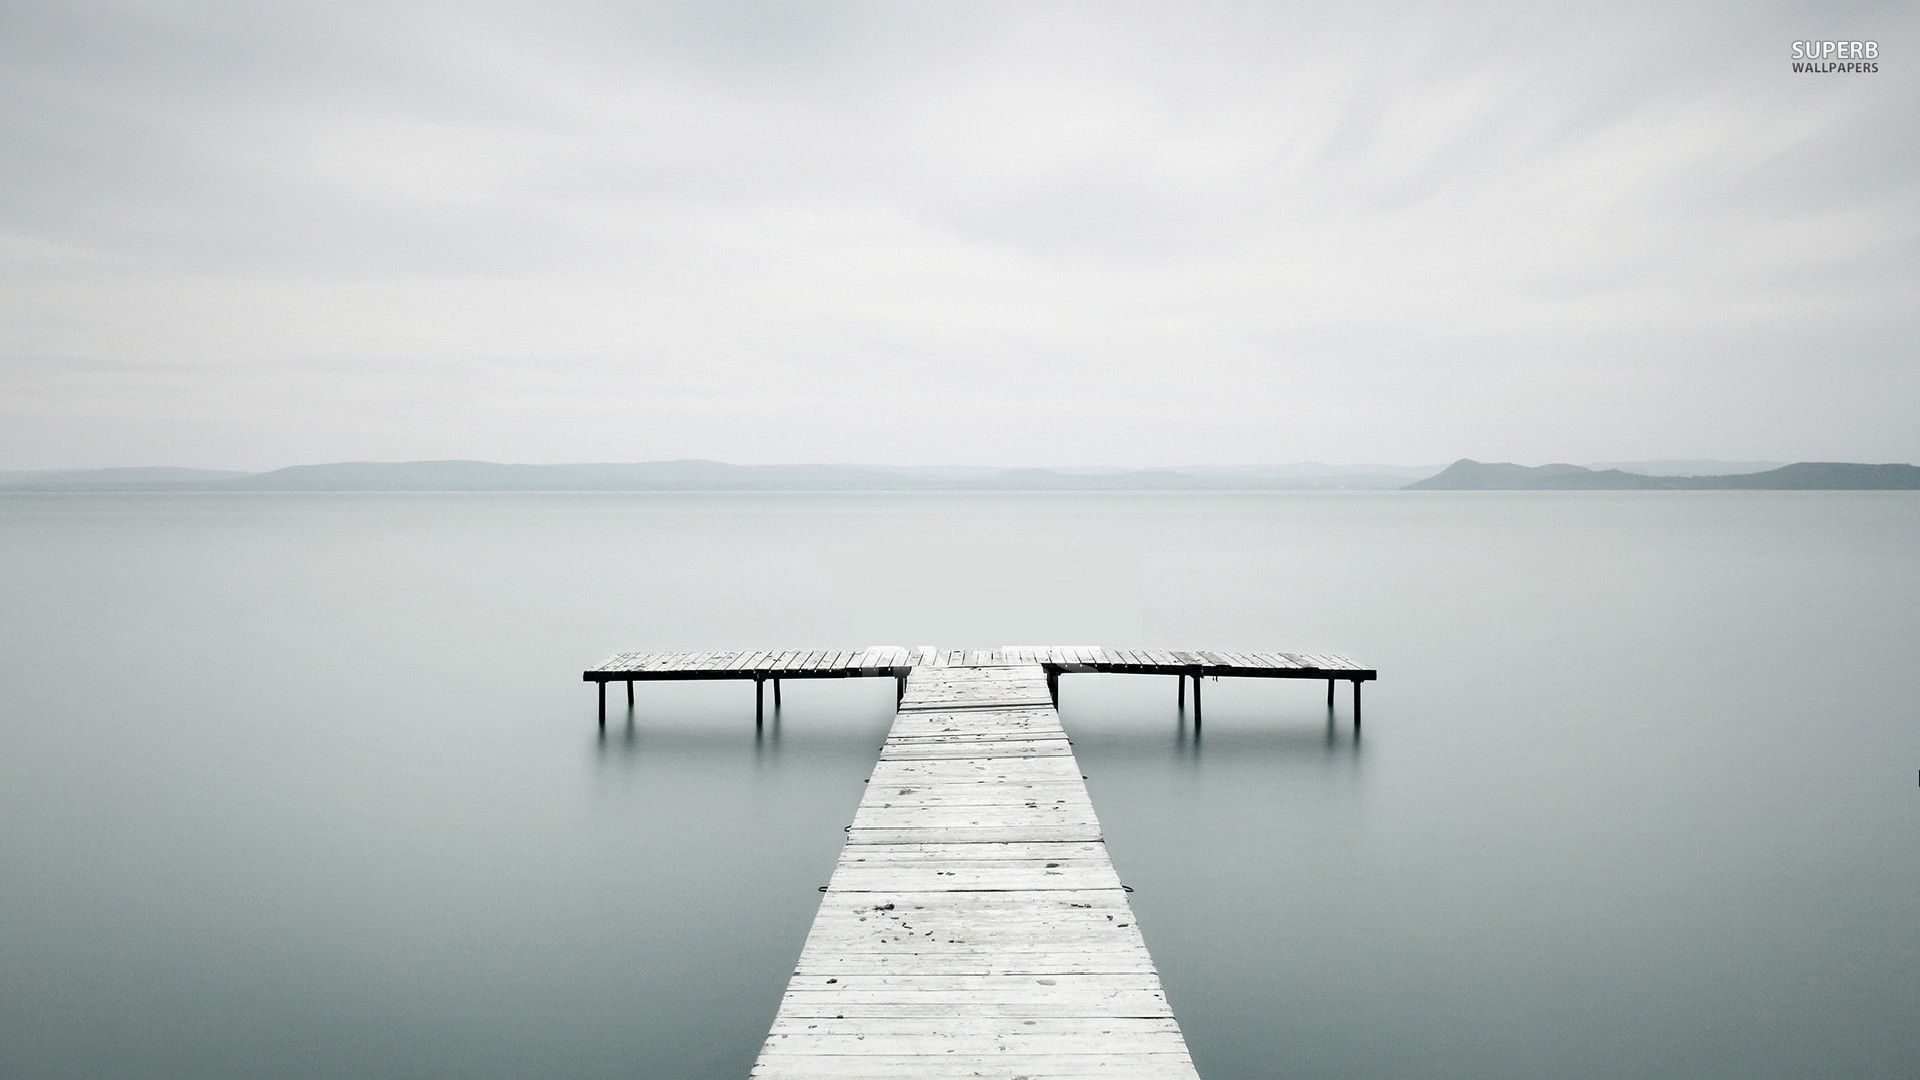 Dock on a misty lake wallpaper - Nature wallpapers -